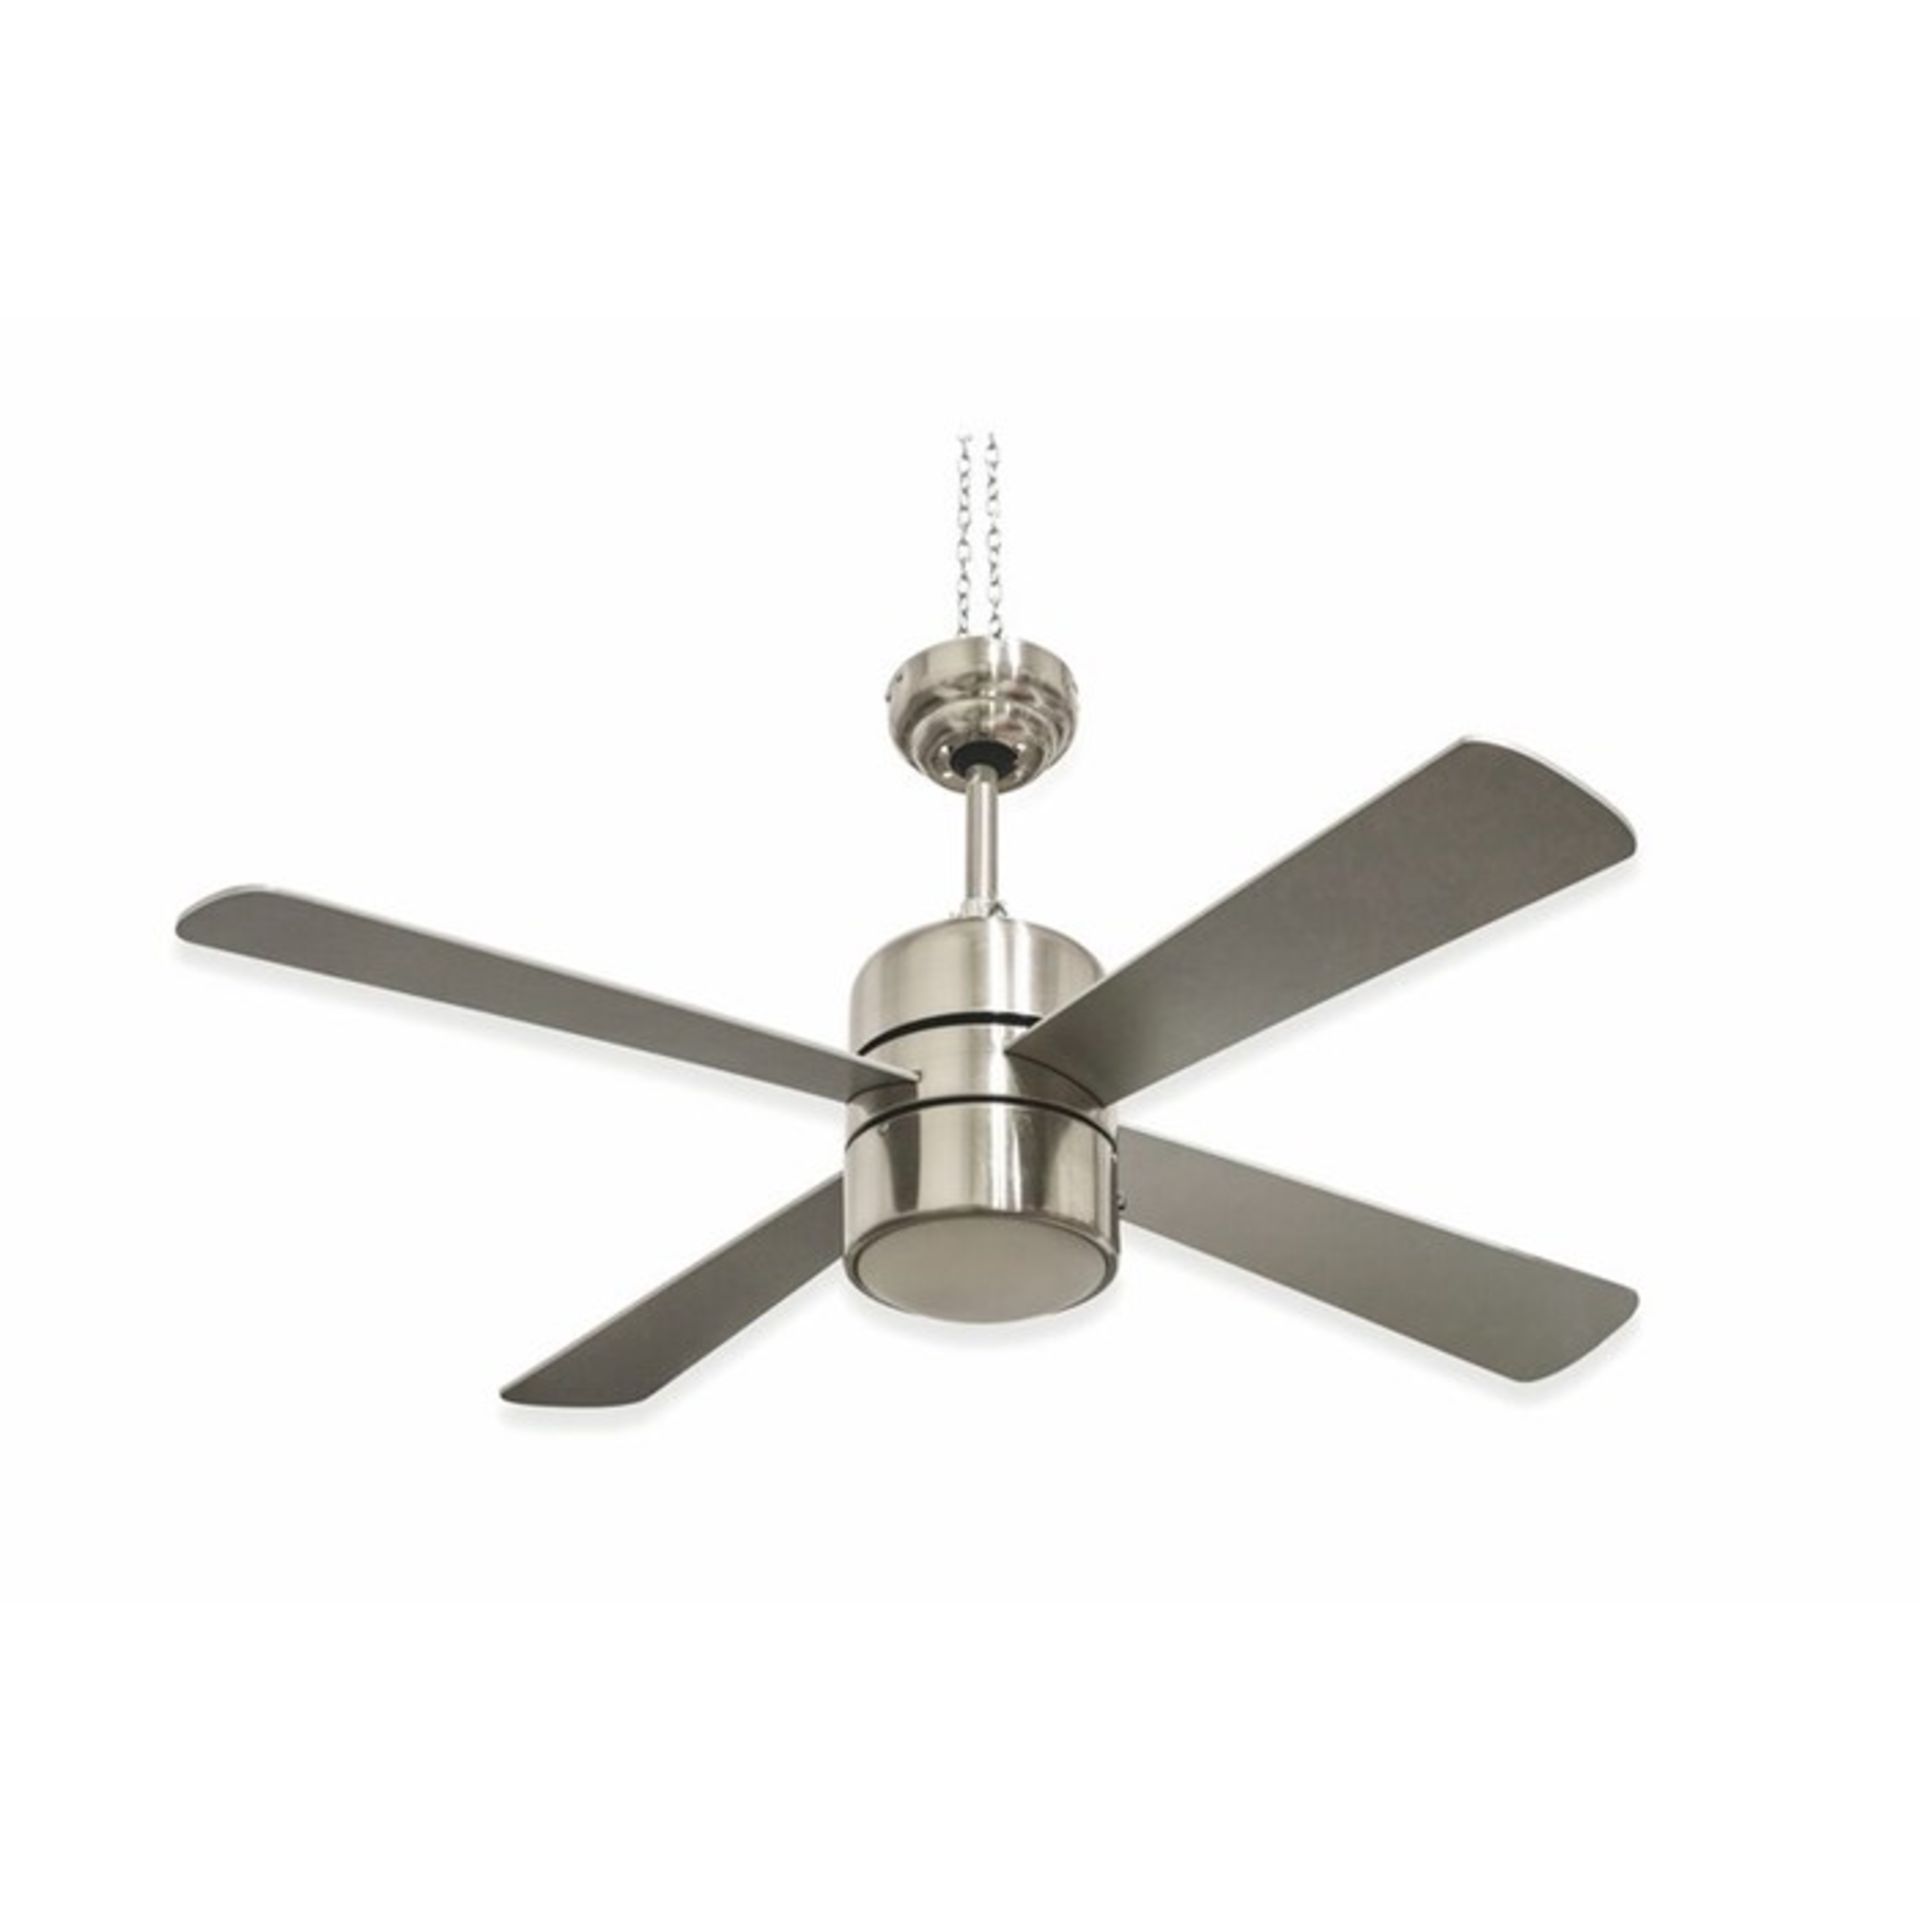 Symple Stuff, 120cm Illuminated 4 Blade Ceiling Fan with Remote - RRP £92.99 (KPRS1025 - 16136/43)